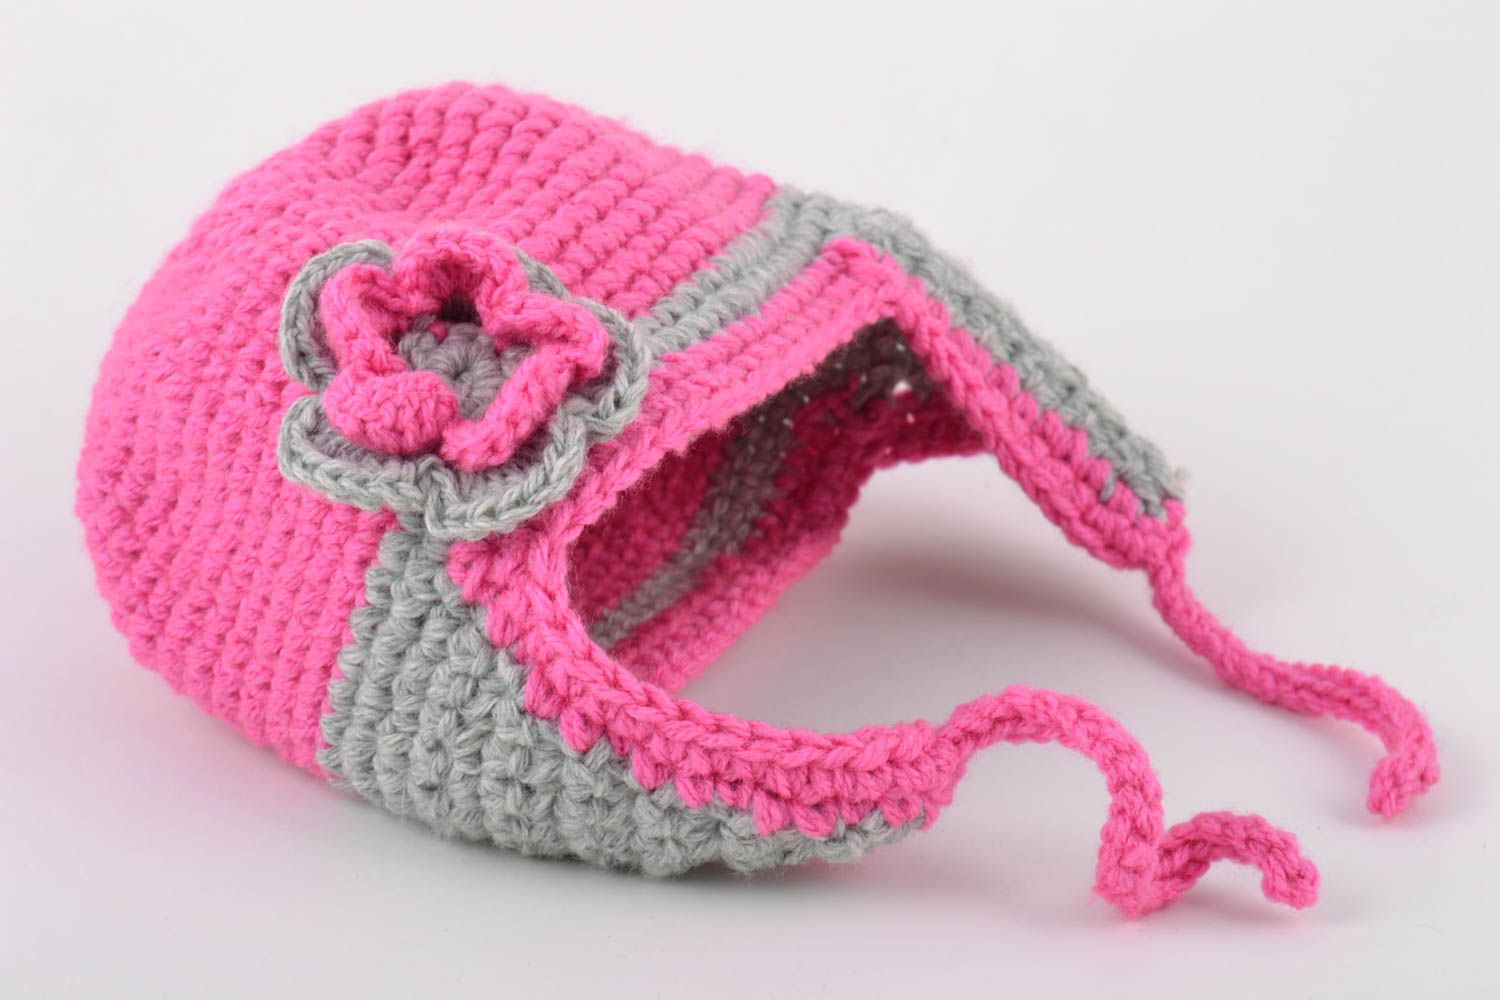 Handmade cotton crochet hat of pink and gray colors with ties for baby girl photo 5